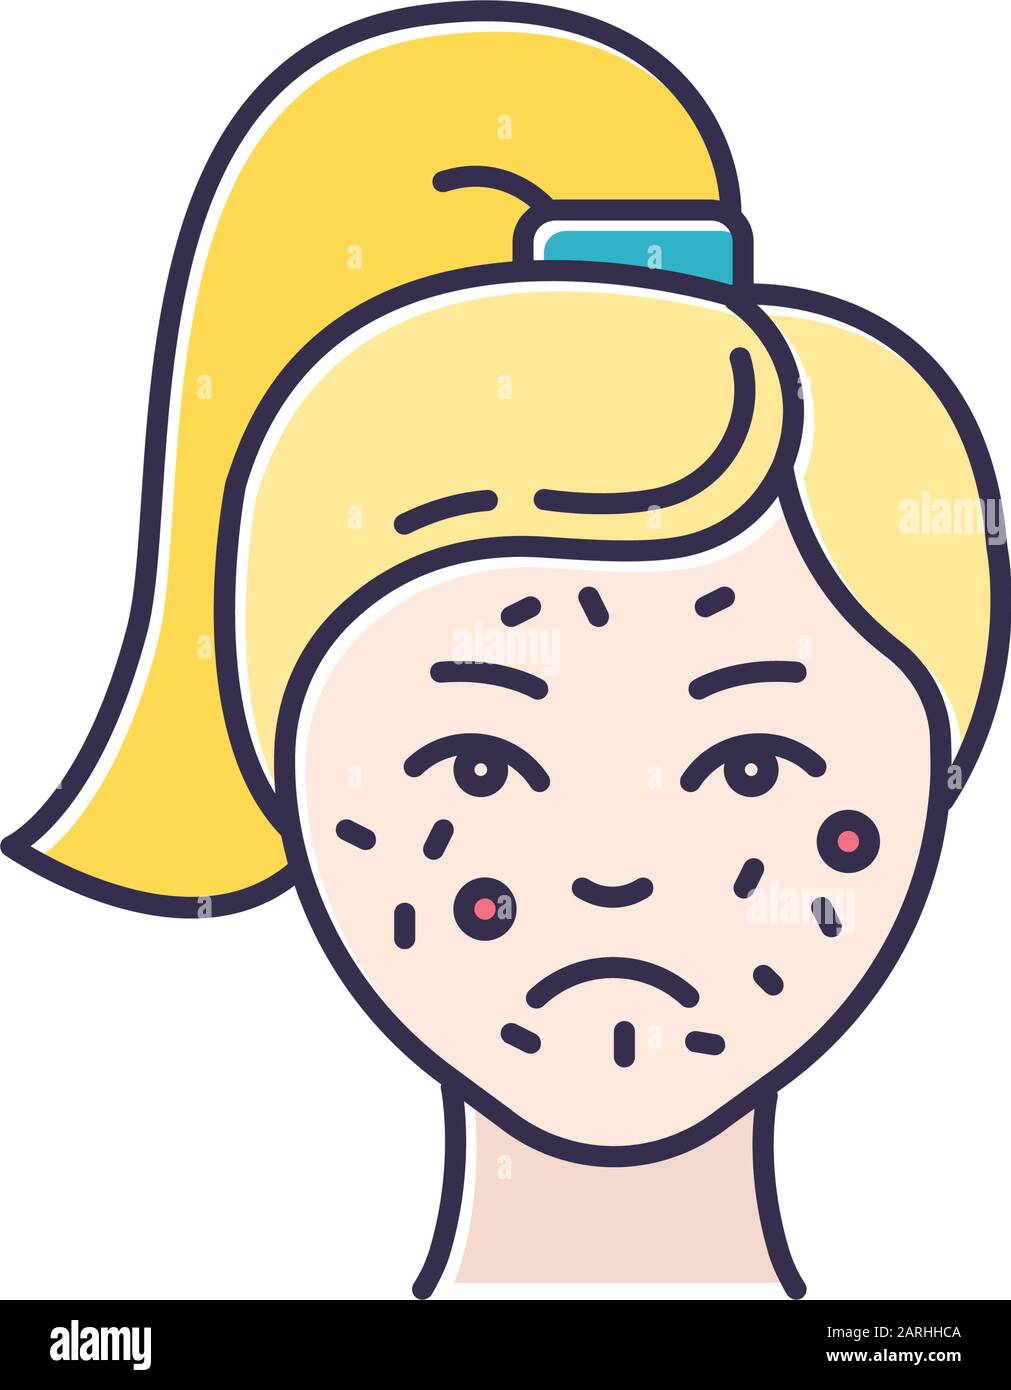 Acne color icon. Pimples on female face. Skincare for inflammation and irritation. Facial treatment. Puberty and teenager health problem. Cosmetology Stock Vector